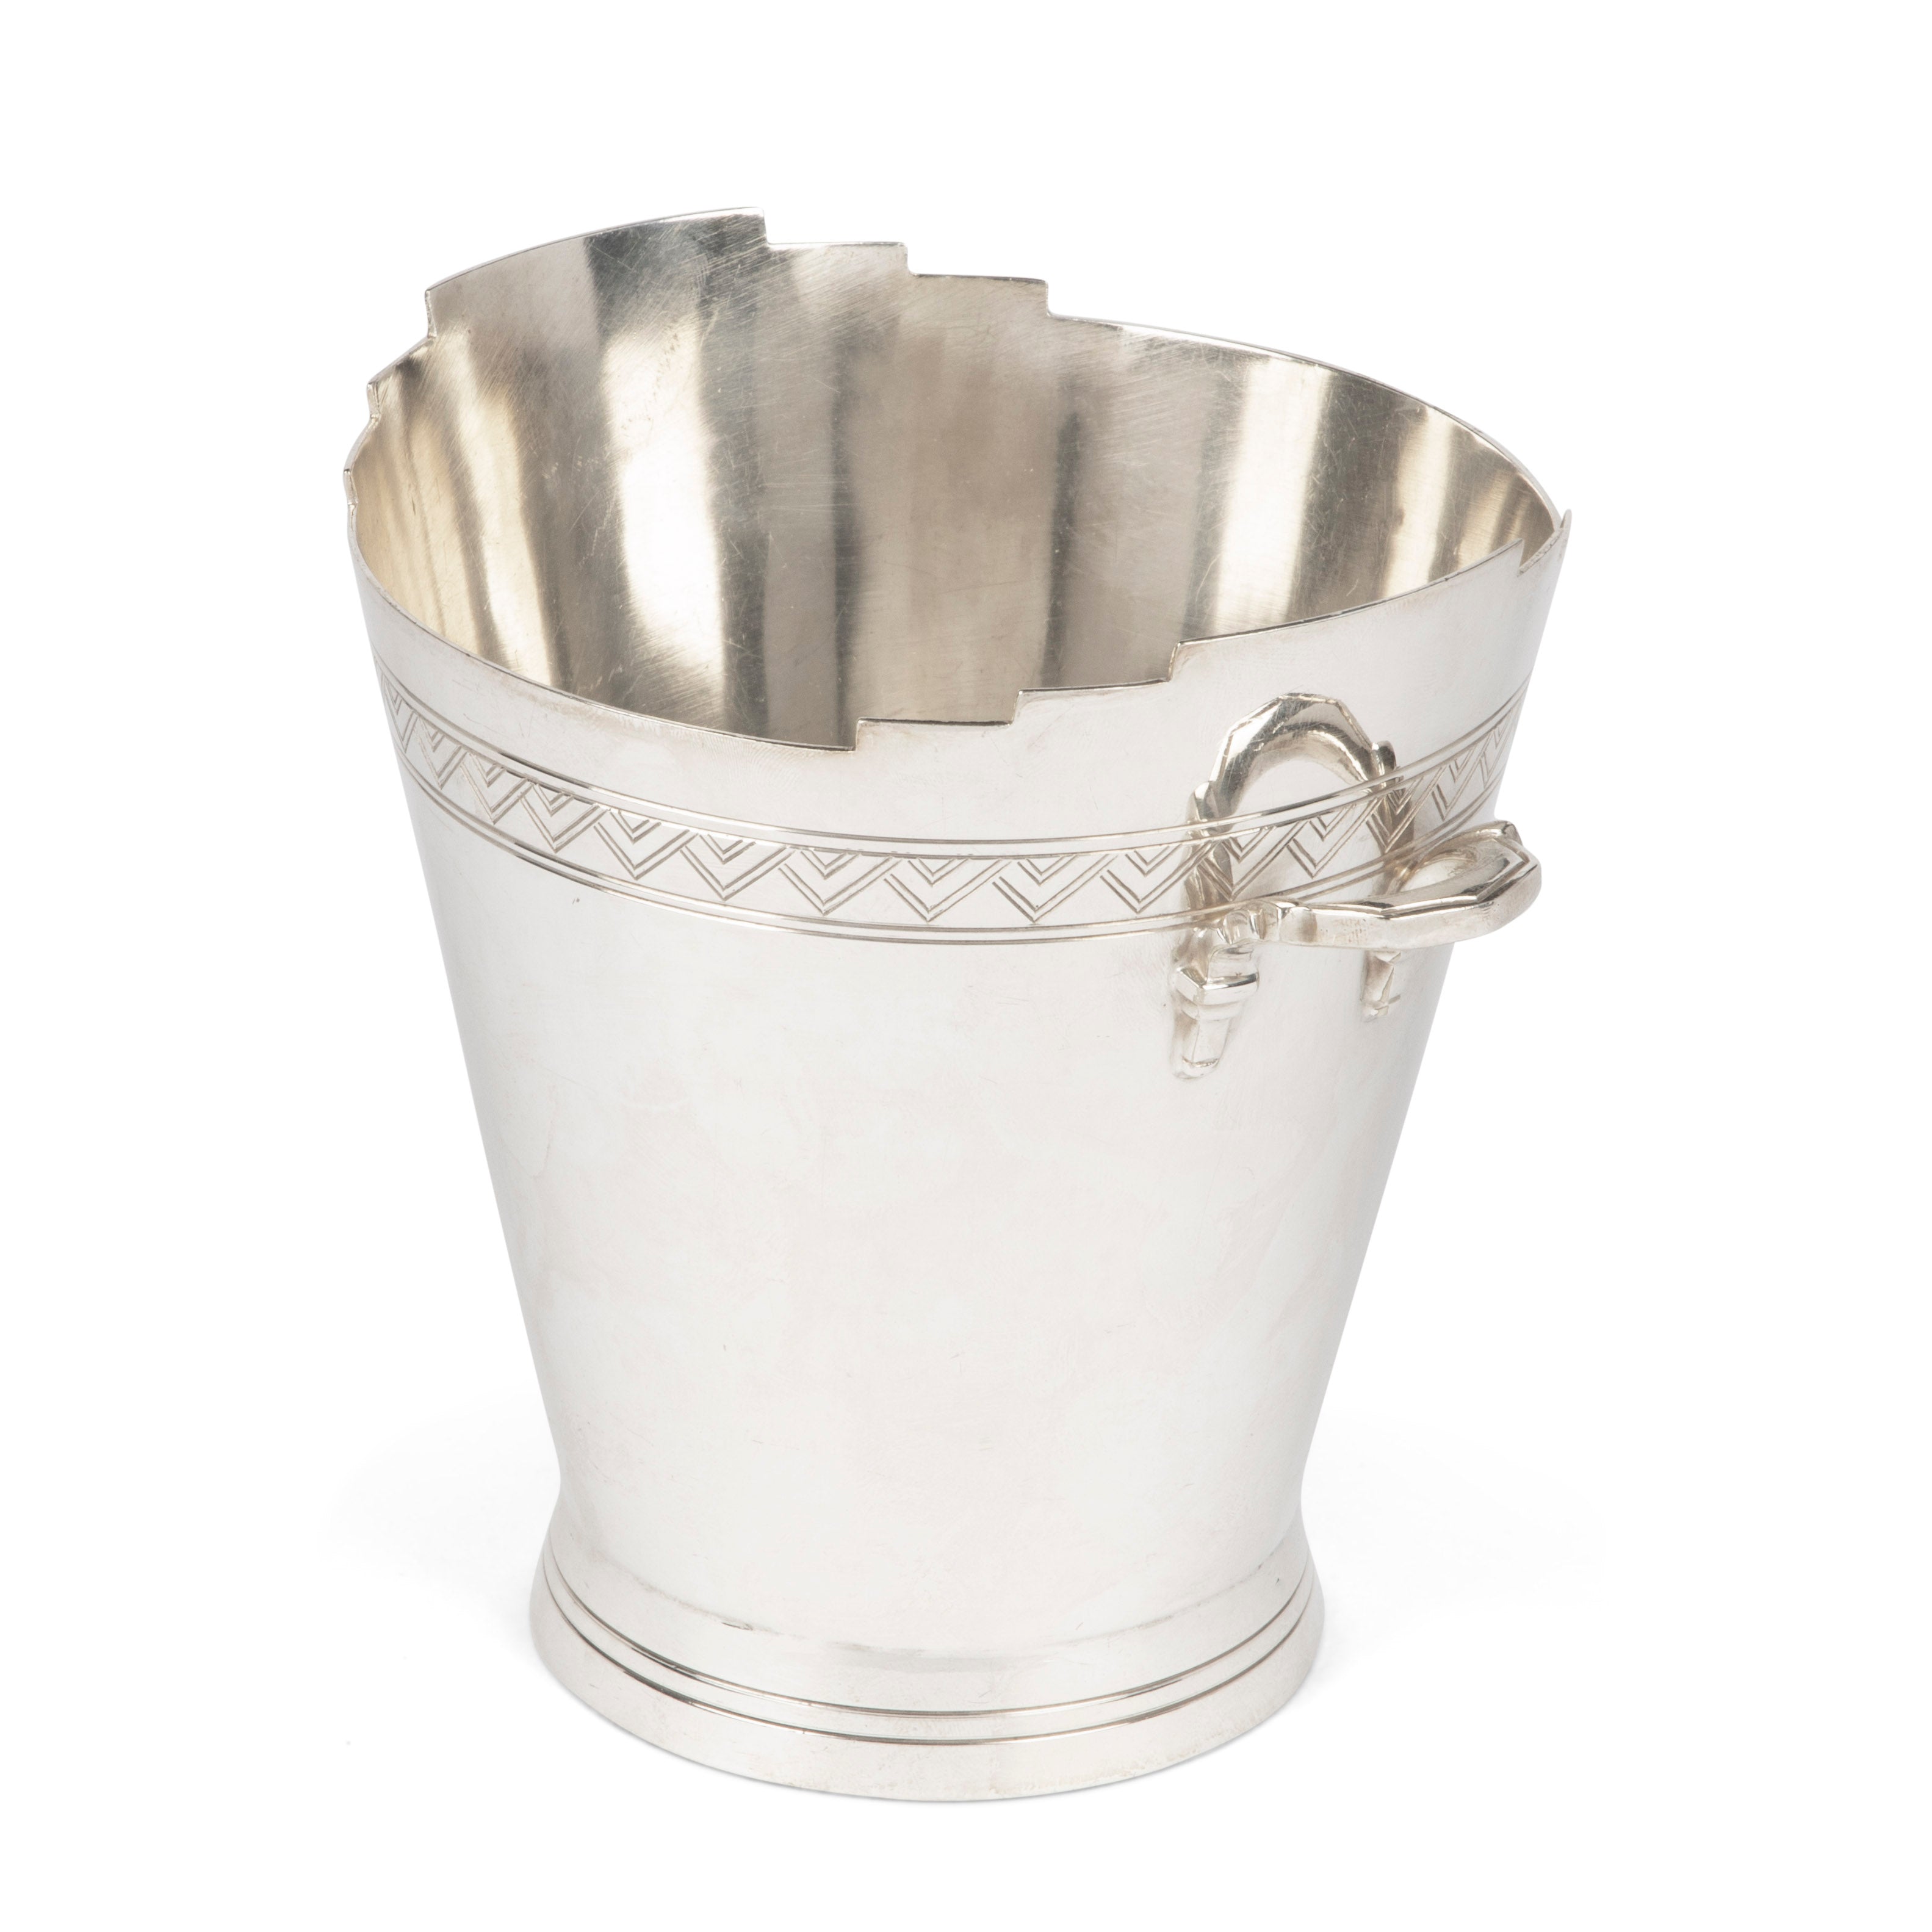 English Art Deco Silver-Plated Ice Bucket by Keith Murray